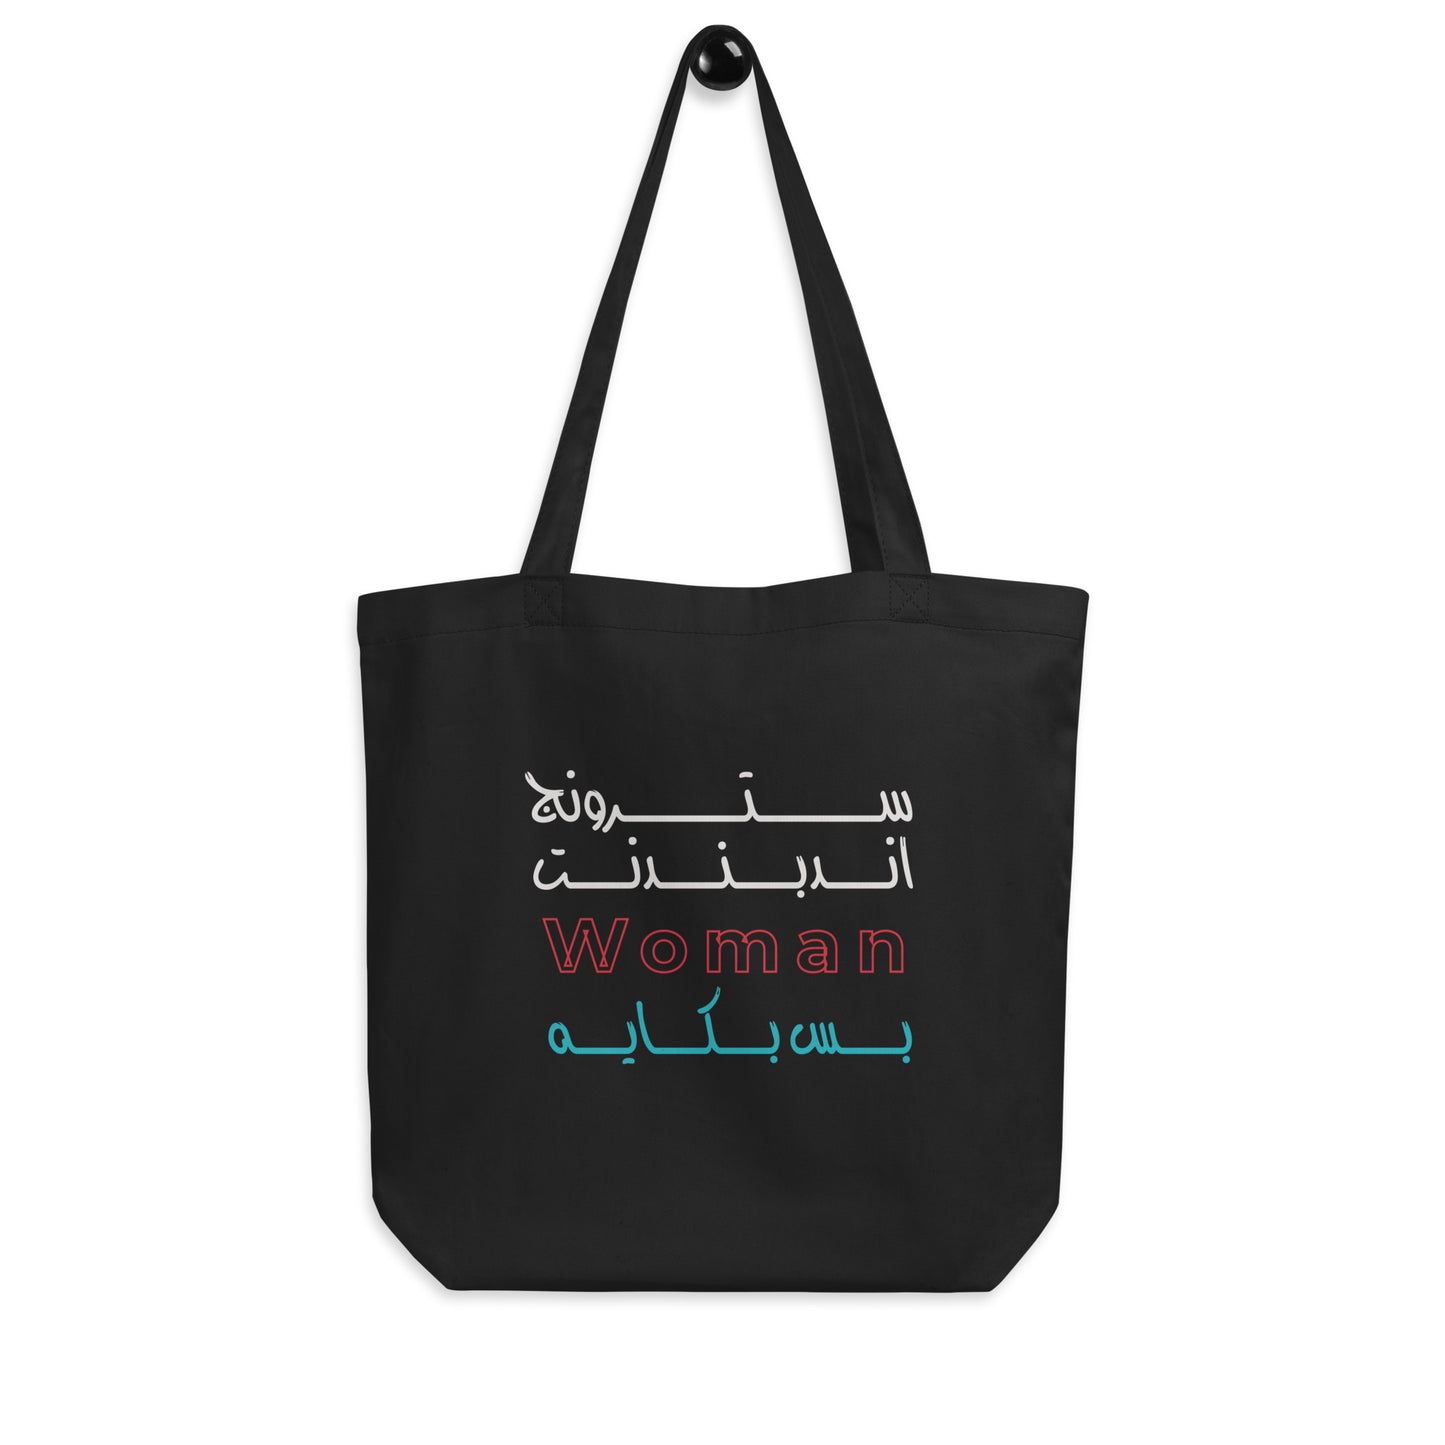 Strong Independent Woman, Yet a Crybaby - Eco Tote Bag